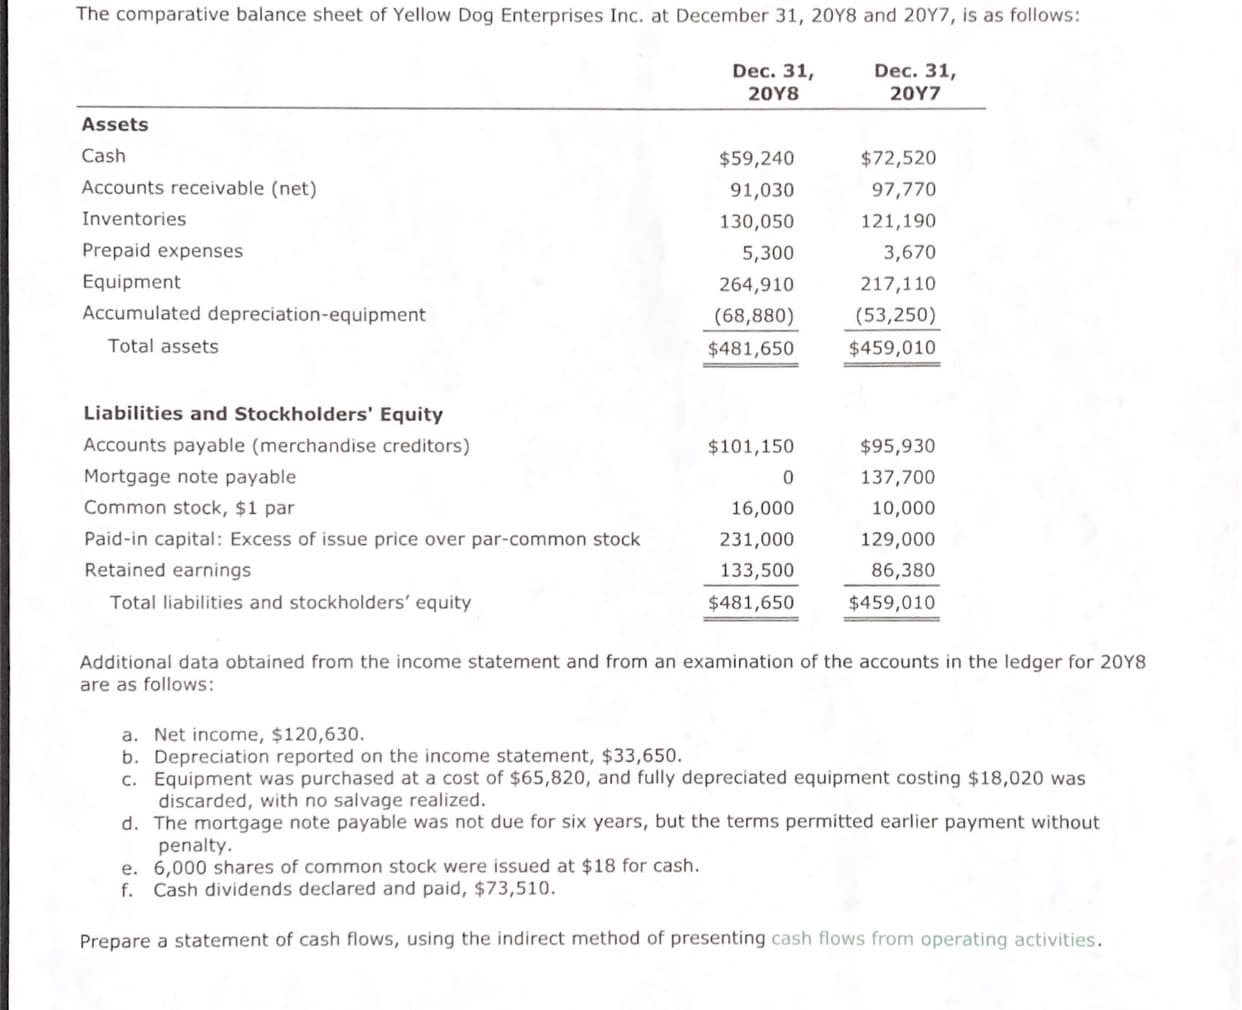 Additional data obtained from the income statement and from an examination of the accounts in the ledger for 20Y8
are as follows:
Net income, $120,630.
b. Depreciation reported on the income statement, $33,650.
c. Equipment was purchased at a cost of $65,820, and fully depreciated equipment costing $18,020 was
discarded, with no salvage realized.
d. The mortgage note payable was not due for six years, but the terms permitted earlier payment without
penalty.
e. 6,000 shares of common stock were issued at $18 for cash.
Cash dividends declared and paid, $73,510.
a.
f.
Prepare a statement of cash flows, using the indirect method of presenting cash flows from operating activities.
